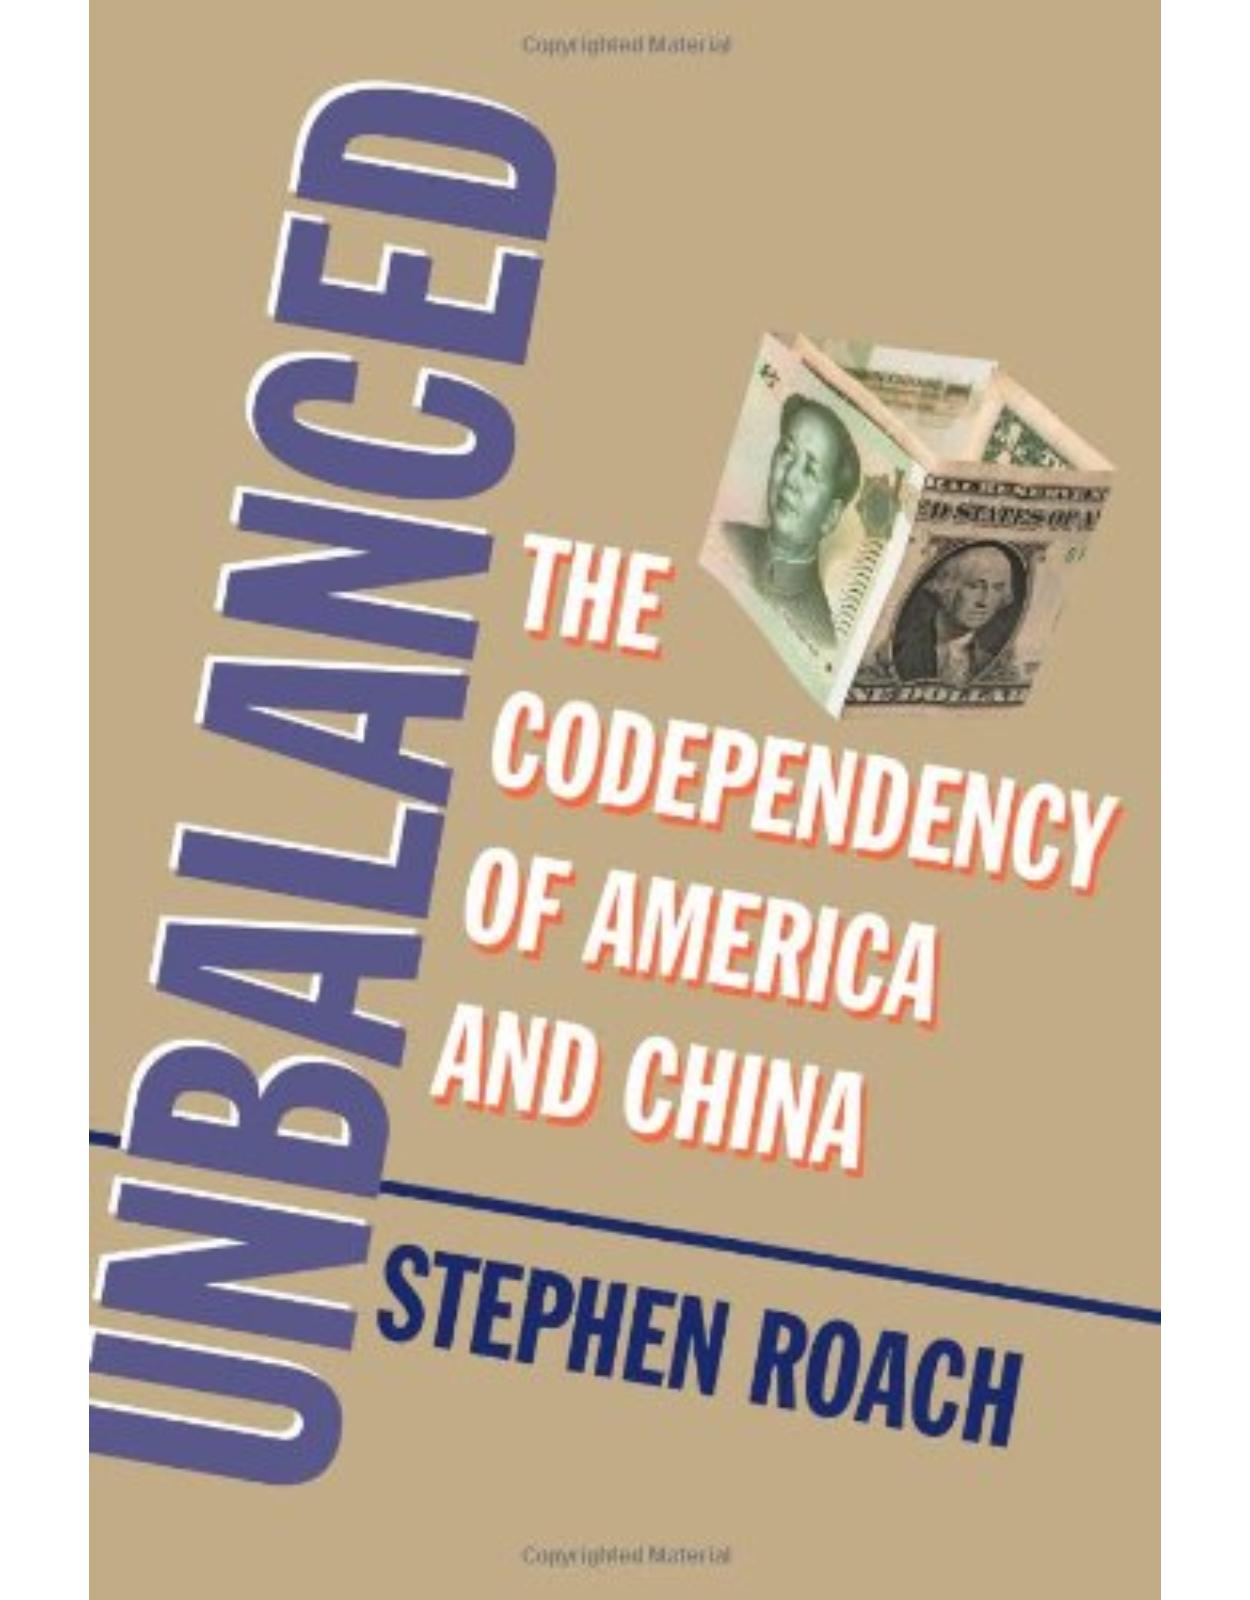 Unbalanced. The Co-Dependence of America and China